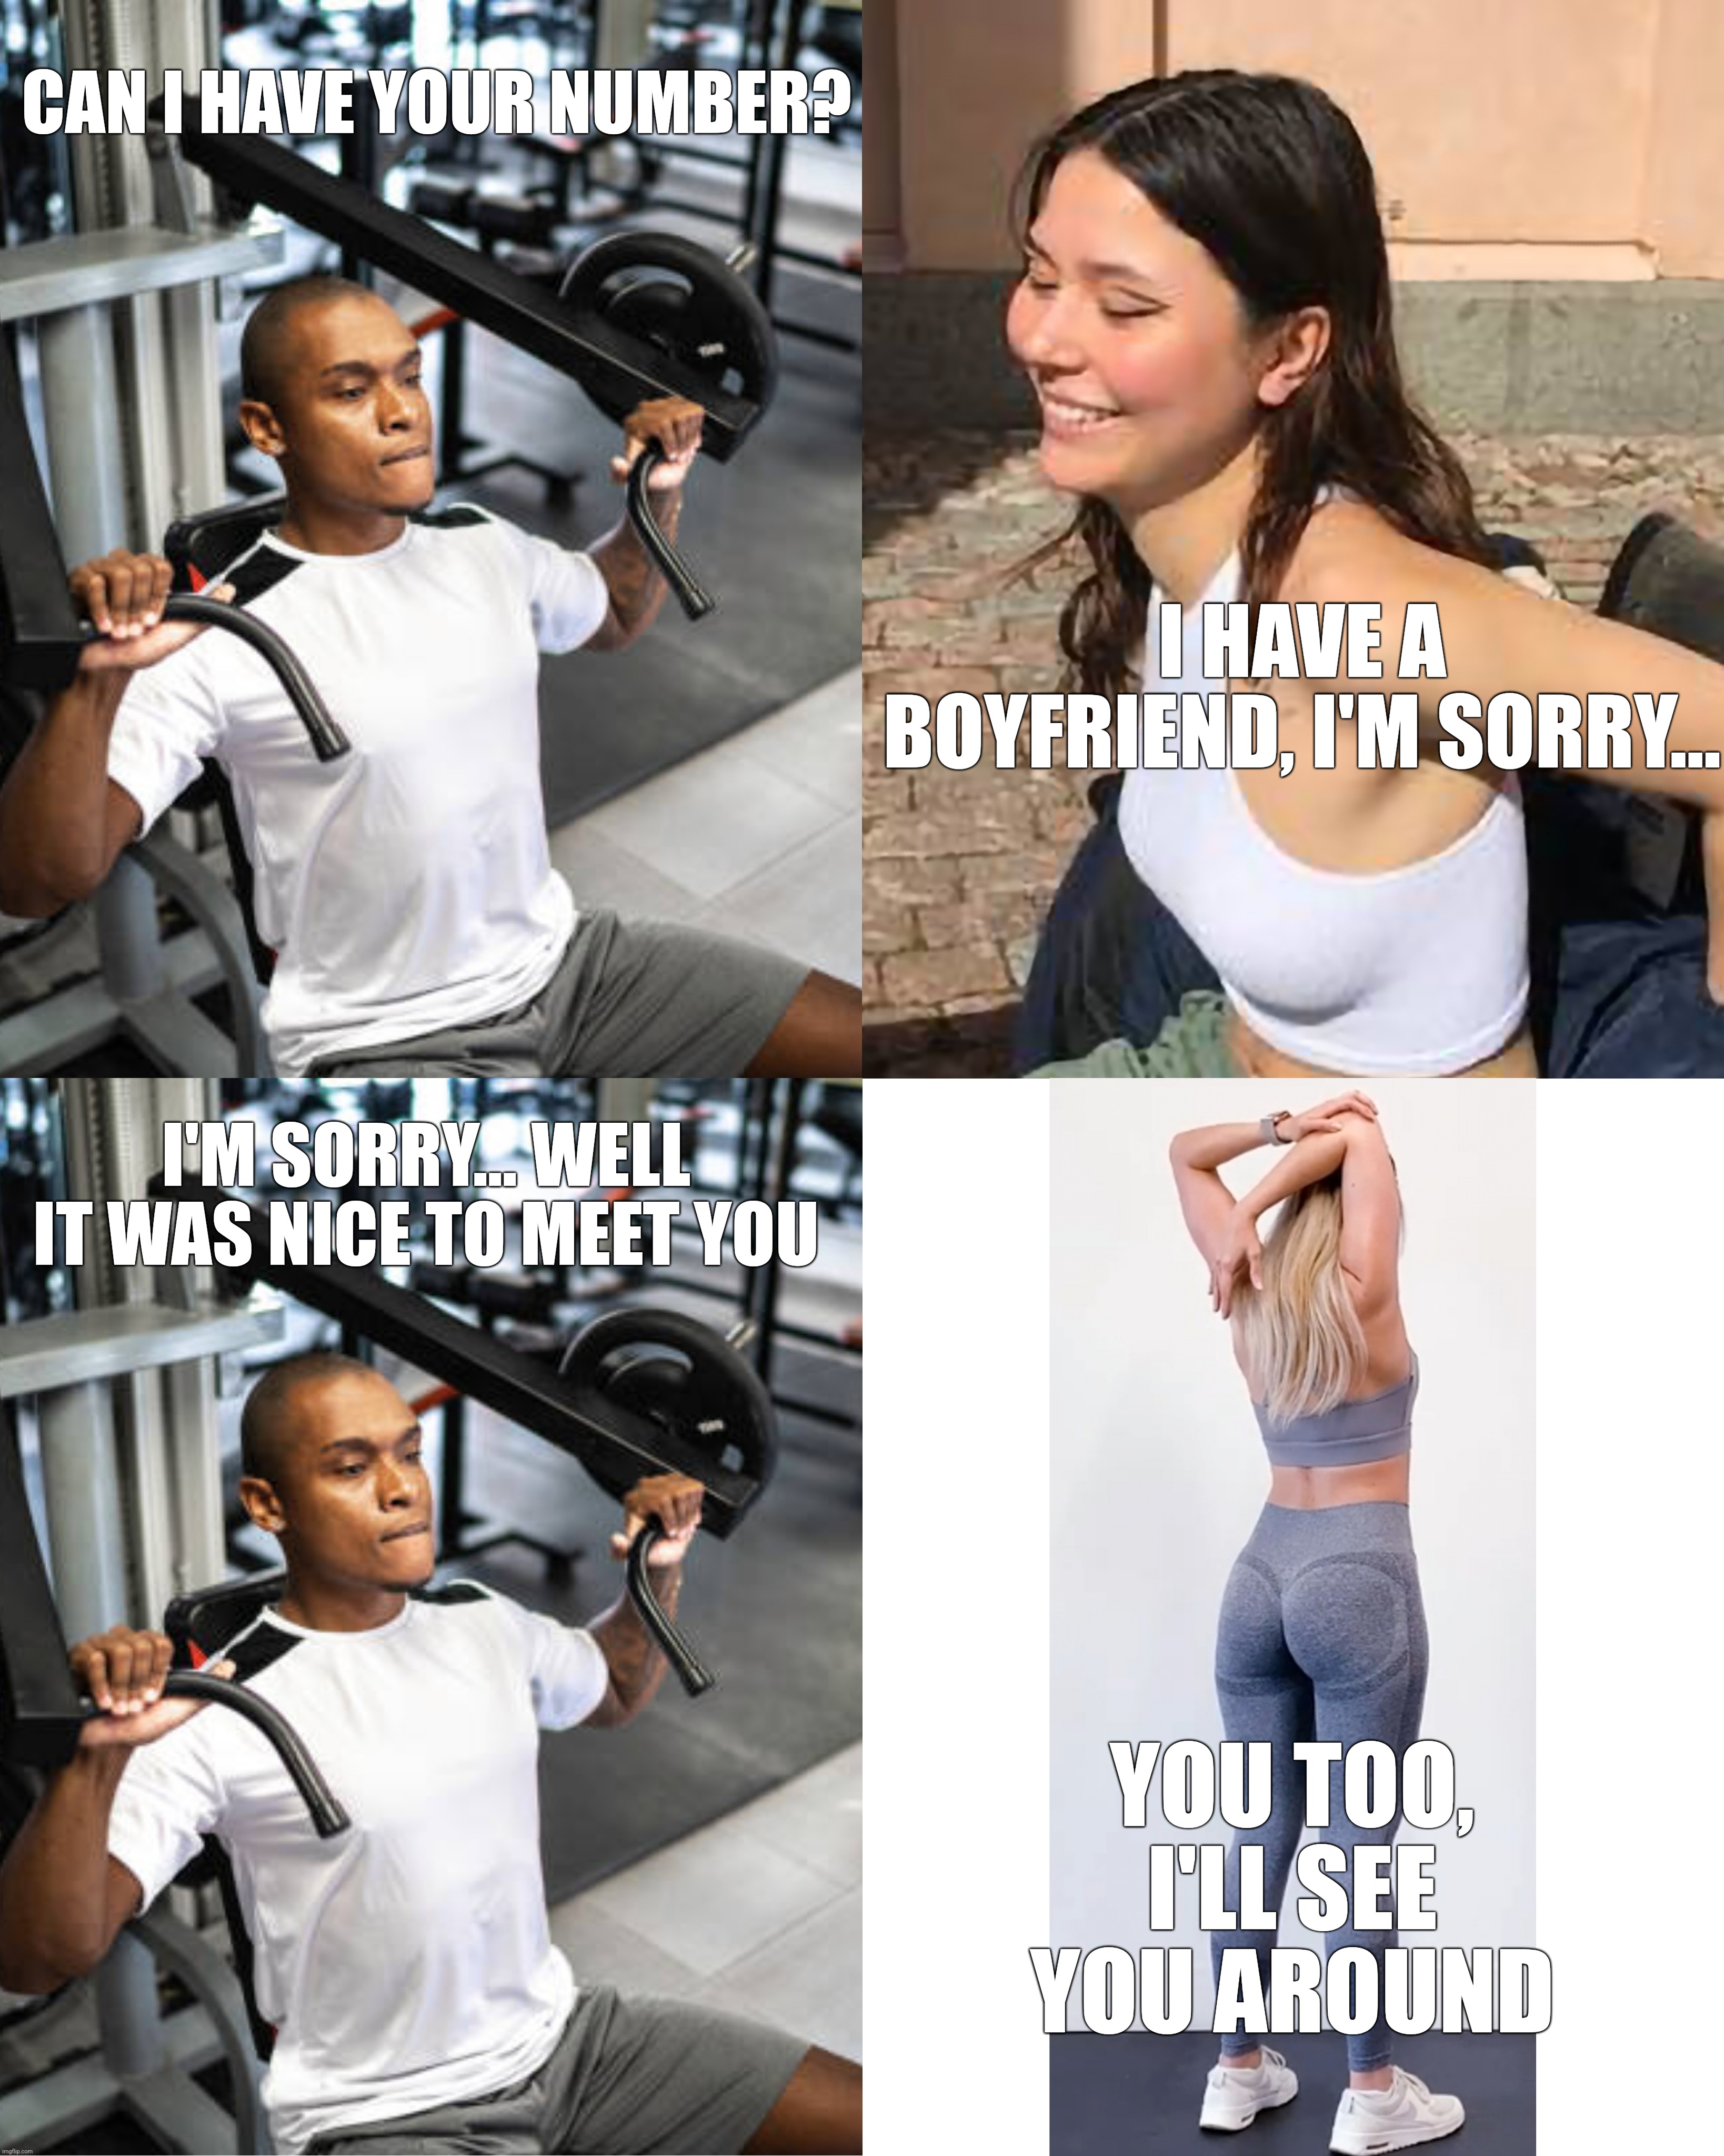 Now is your opportunity to steal her | CAN I HAVE YOUR NUMBER? I HAVE A BOYFRIEND, I'M SORRY... I'M SORRY... WELL IT WAS NICE TO MEET YOU; YOU TOO, I'LL SEE YOU AROUND | image tagged in gym,approaching a girl,she wants you,she secretly likes you | made w/ Imgflip meme maker